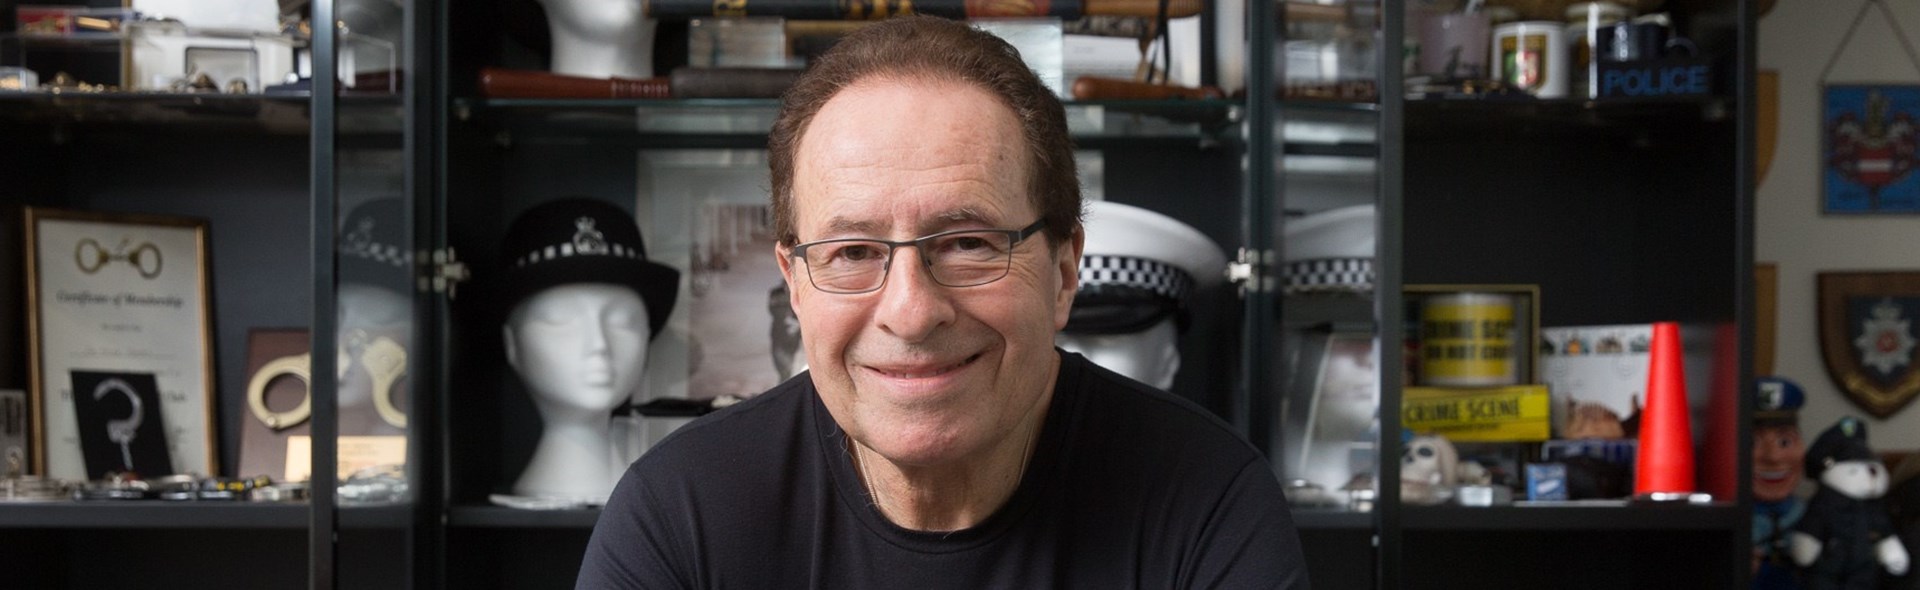 In conversation with Peter James, UK No.1 best-selling crime and thriller author